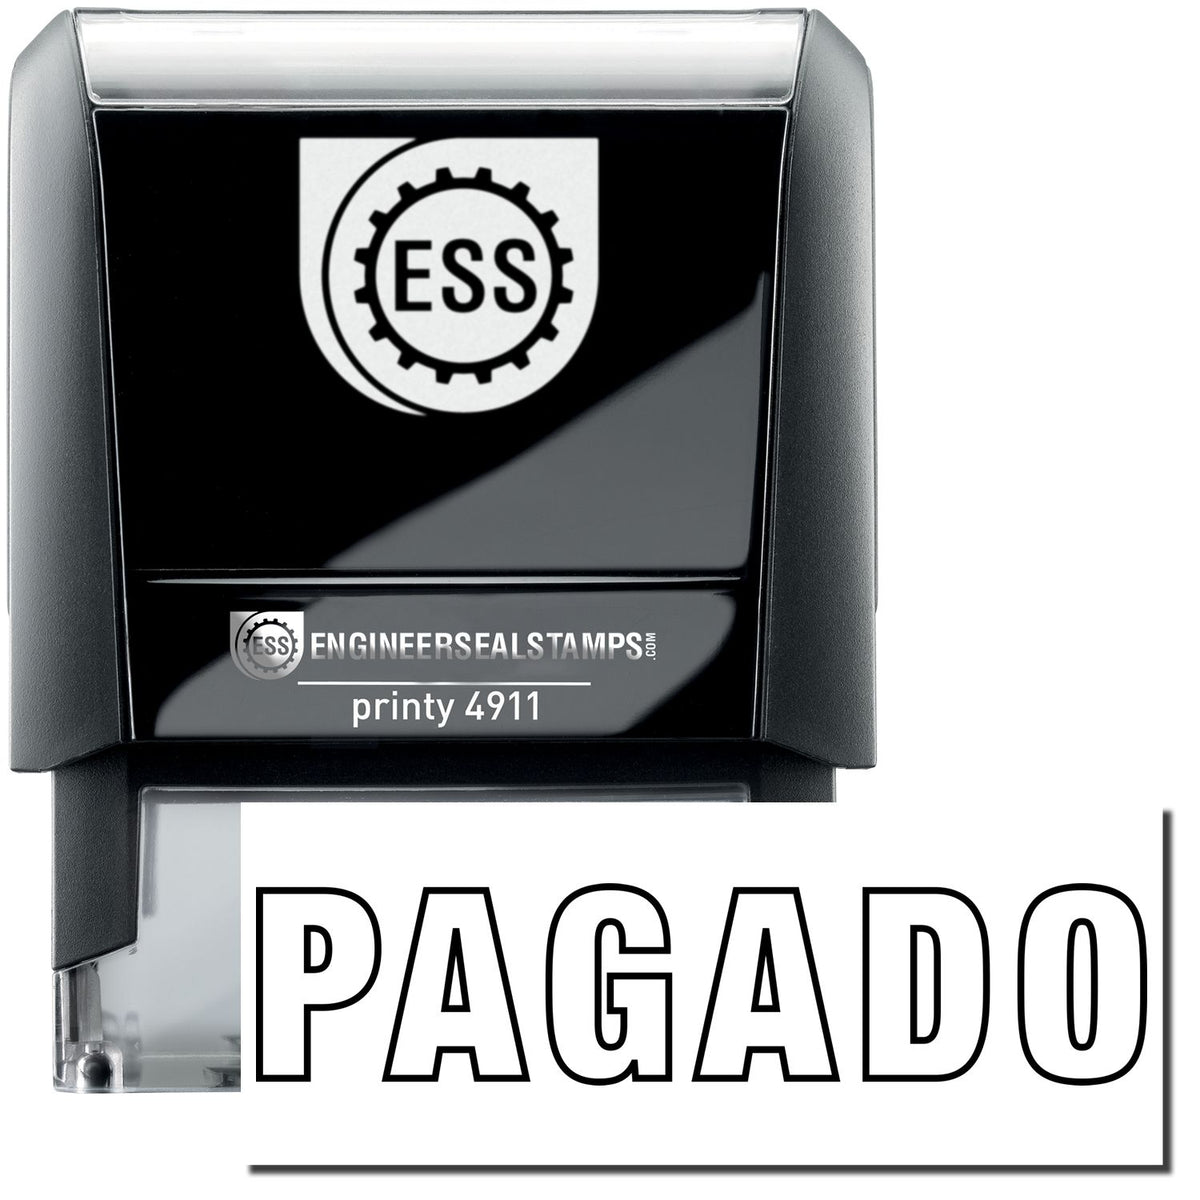 A self-inking stamp with a stamped image showing how the text &quot;PAGADO&quot; in an outline style is displayed after stamping.